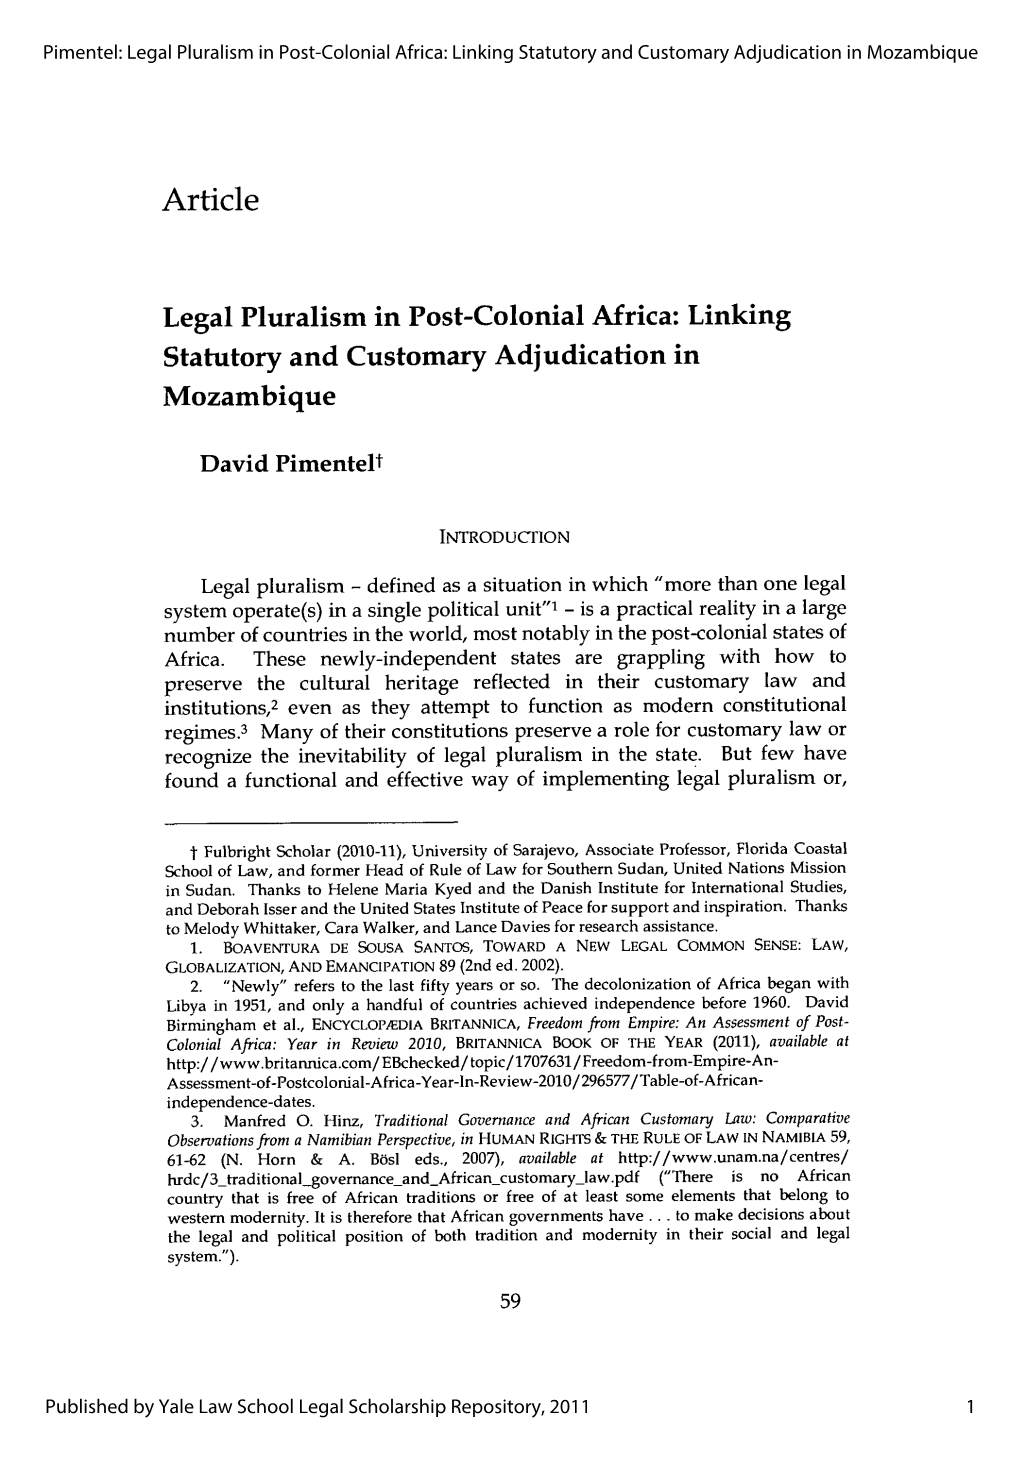 Legal Pluralism in Post-Colonial Africa: Linking Statutory and Customary Adjudication in Mozambique